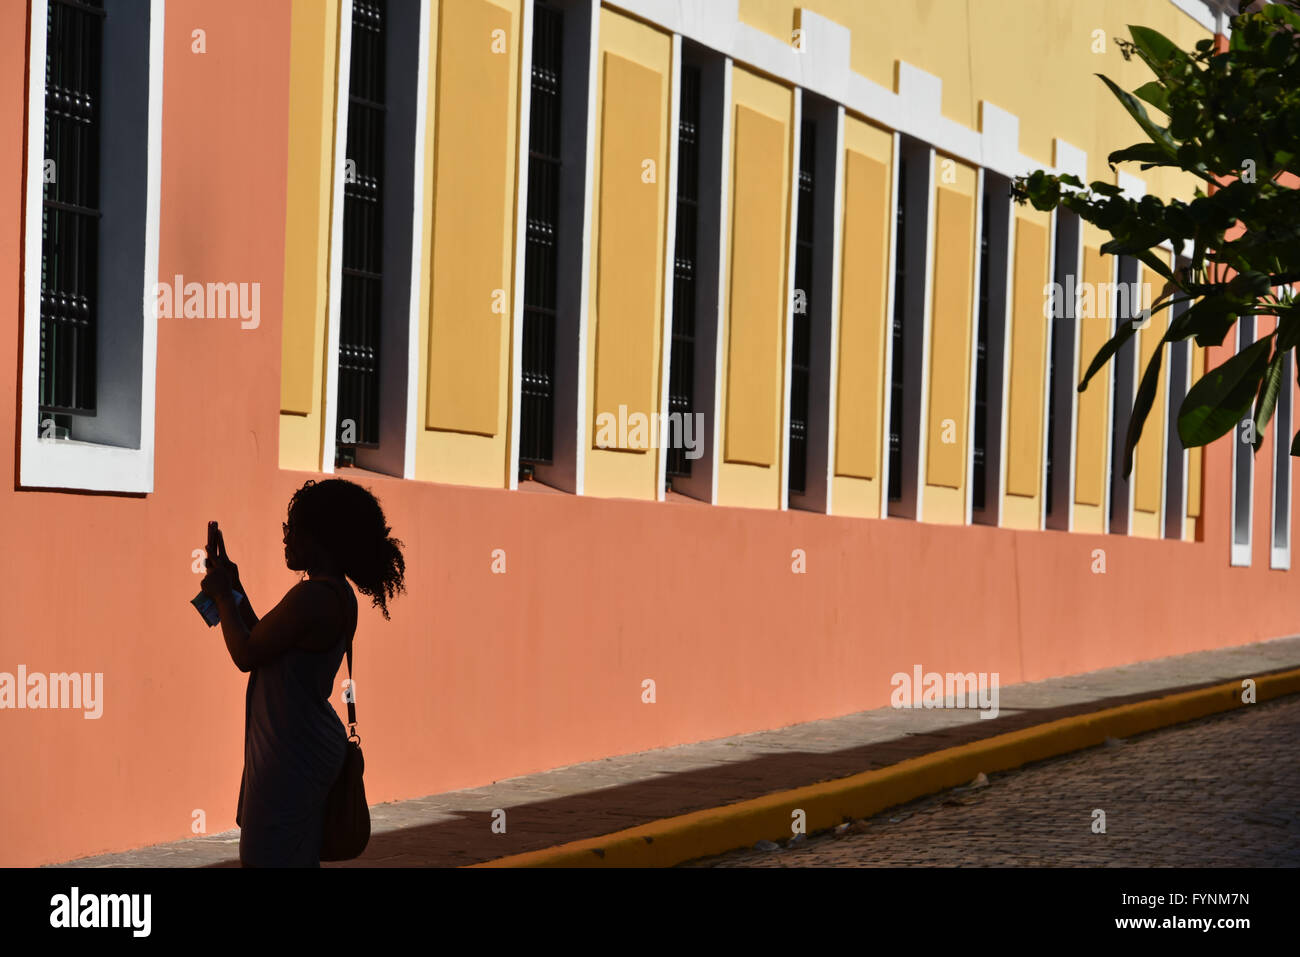 Silhouette of a tourist taking a photo of colorful buildings in Old San Juan, Puerto Rico Stock Photo